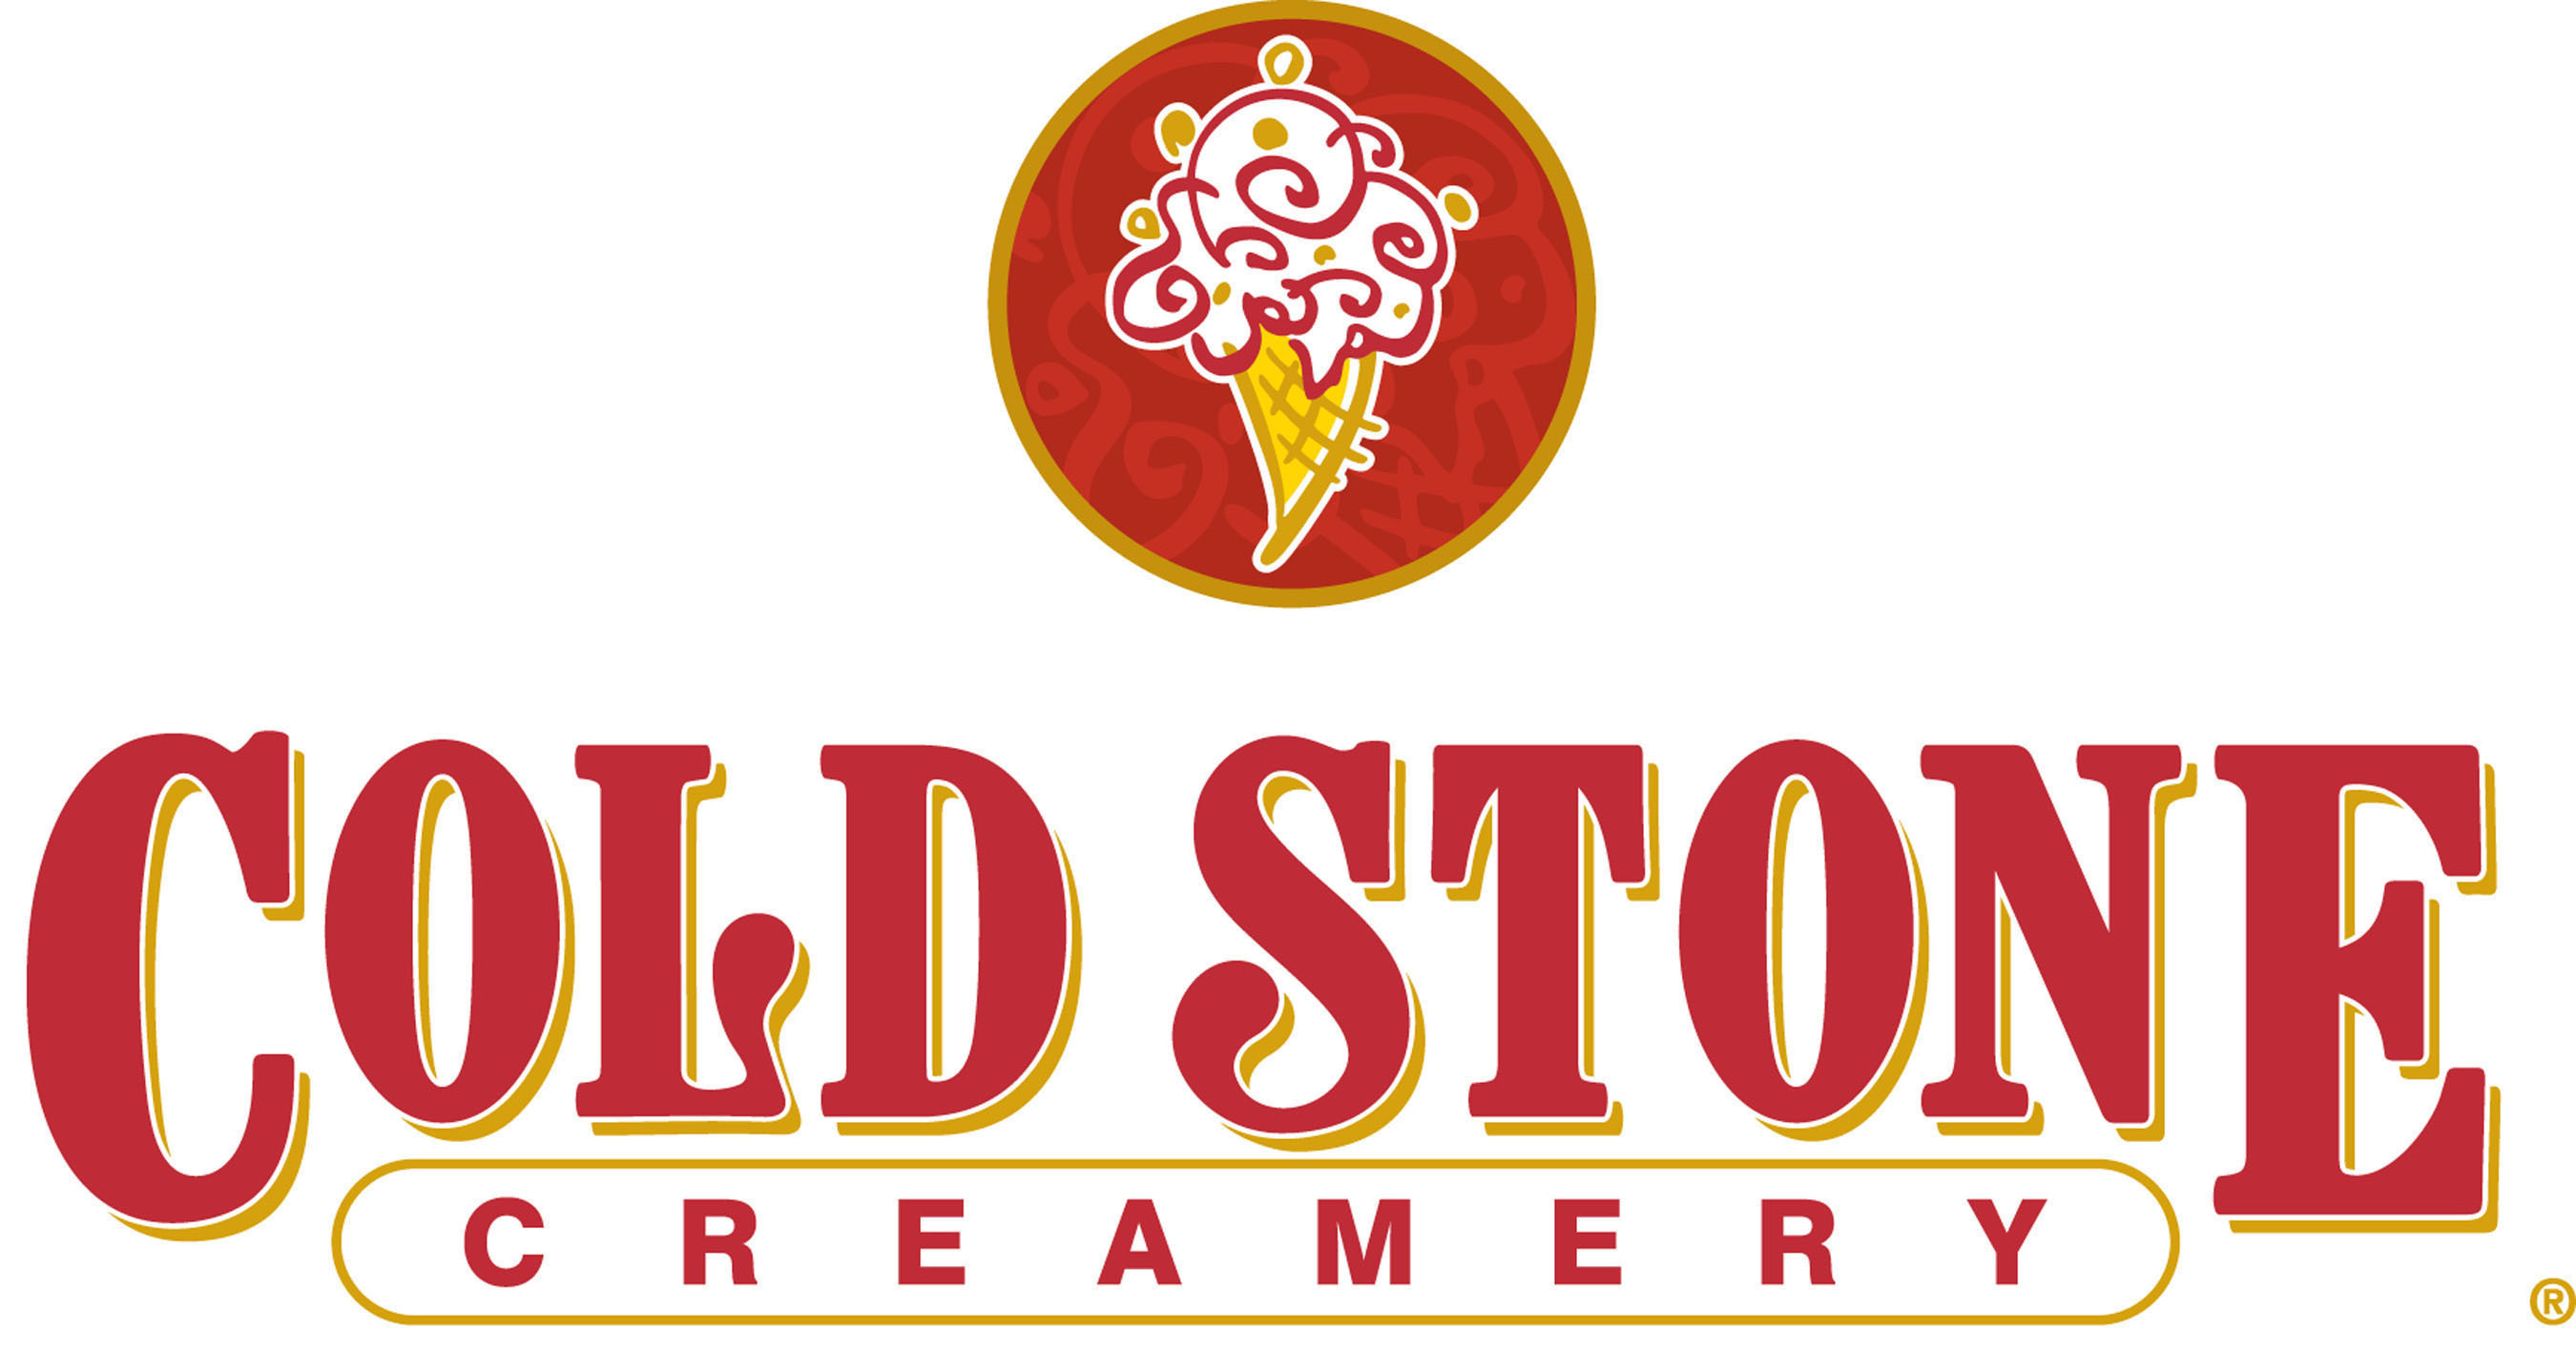 Cold Stone Creamery delivers The Ultimate Ice Cream Experience(r) through a community of franchisees who are passionate about ice cream. The secret recipe for smooth and creamy ice cream is handcrafted fresh daily in each store, and then customized by combining a variety of mix-ins on a frozen granite stone. Headquartered in Scottsdale, Ariz., Cold Stone Creamery is a subsidiary of Kahala Brands, one of the fastest growing franchising companies in the world. For more information about Cold Stone Creamery, visit  www.ColdStoneCreamery.com (PRNewsFoto/Cold Stone Creamery) (PRNewsFoto/) (PRNewsFoto/)